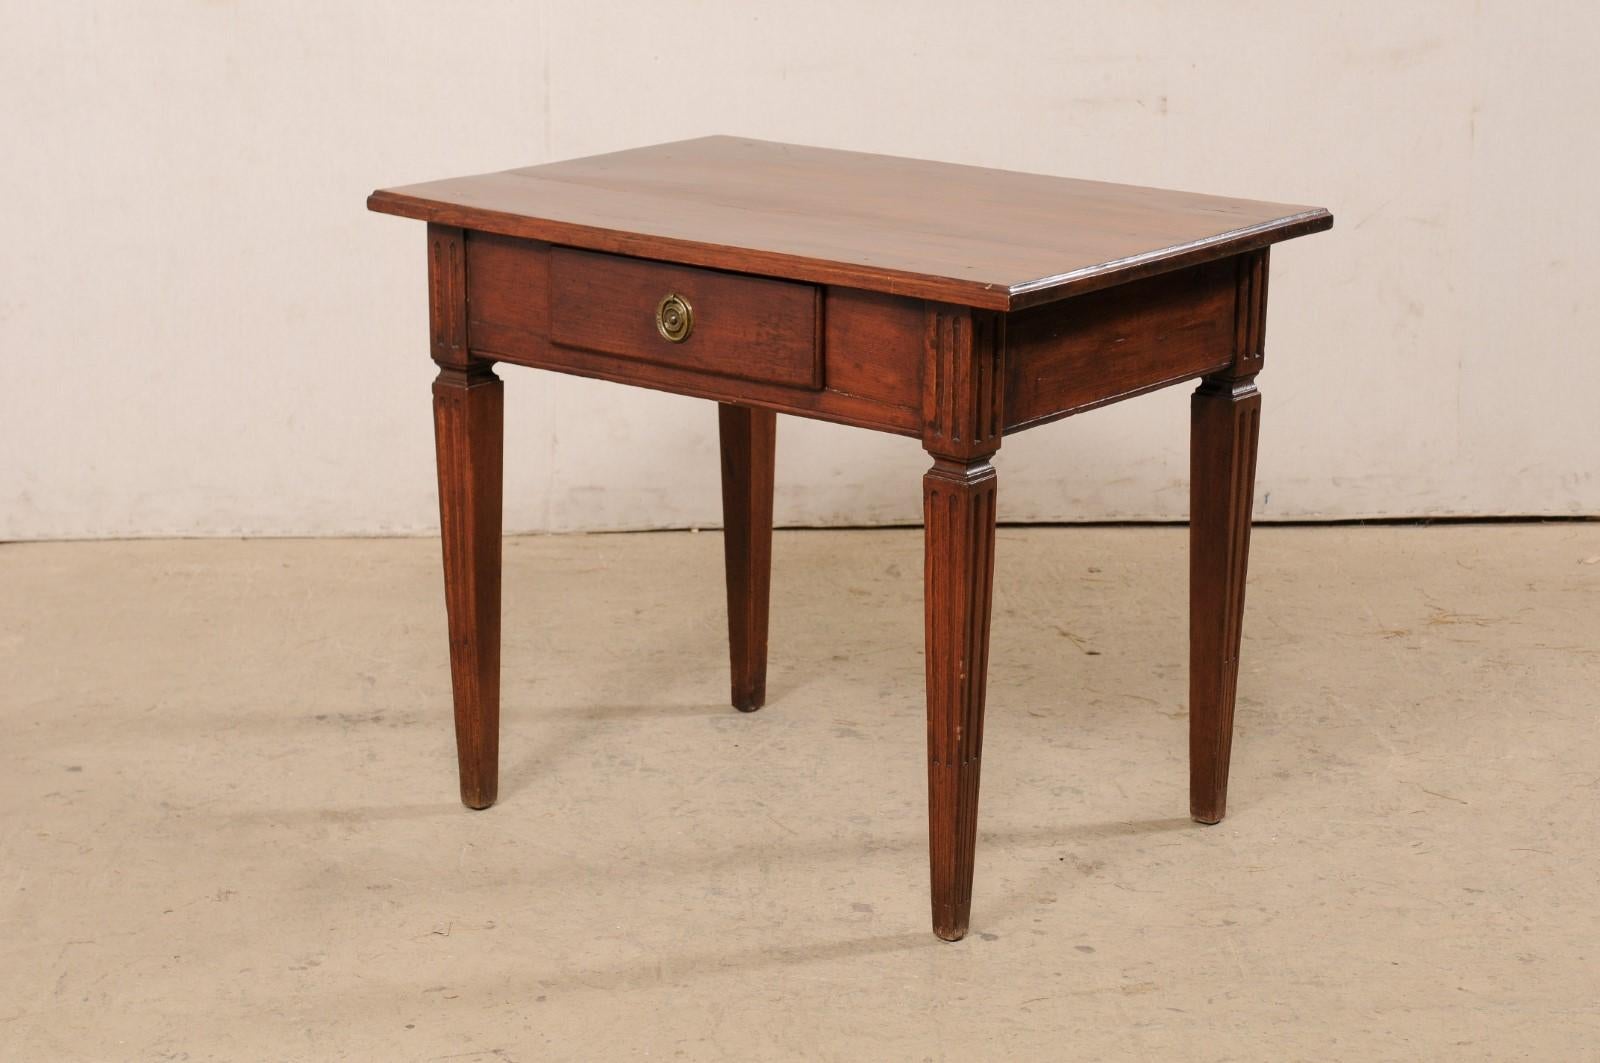 Italian Small Wooden Table w/Drawer Presented on Flute-Carved Legs, 19th C. For Sale 5